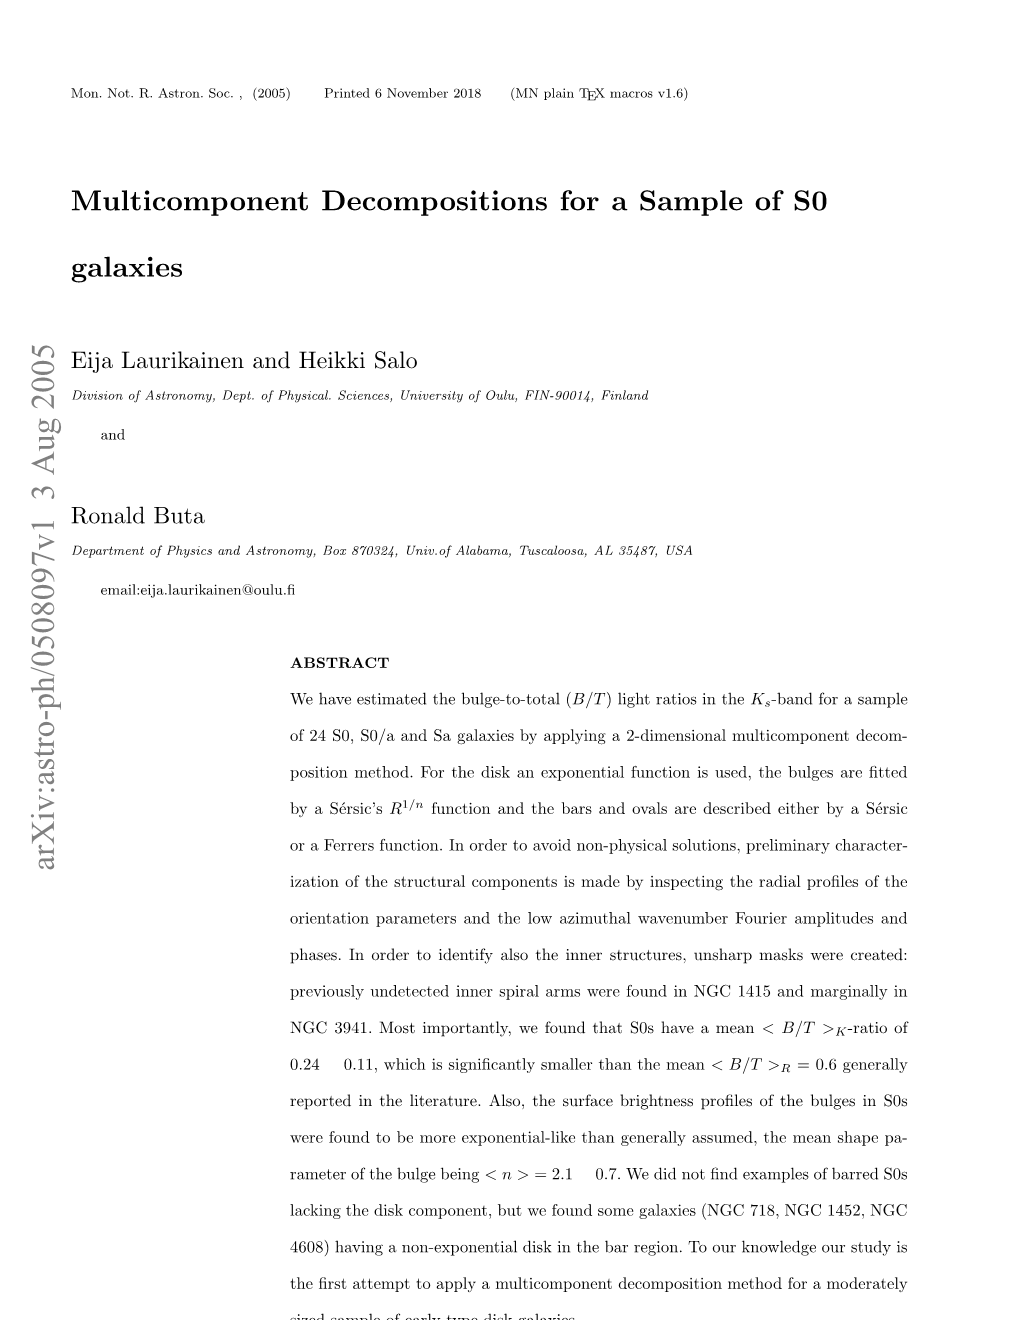 Multicomponent Decompositions for a Sample of S0 Galaxies